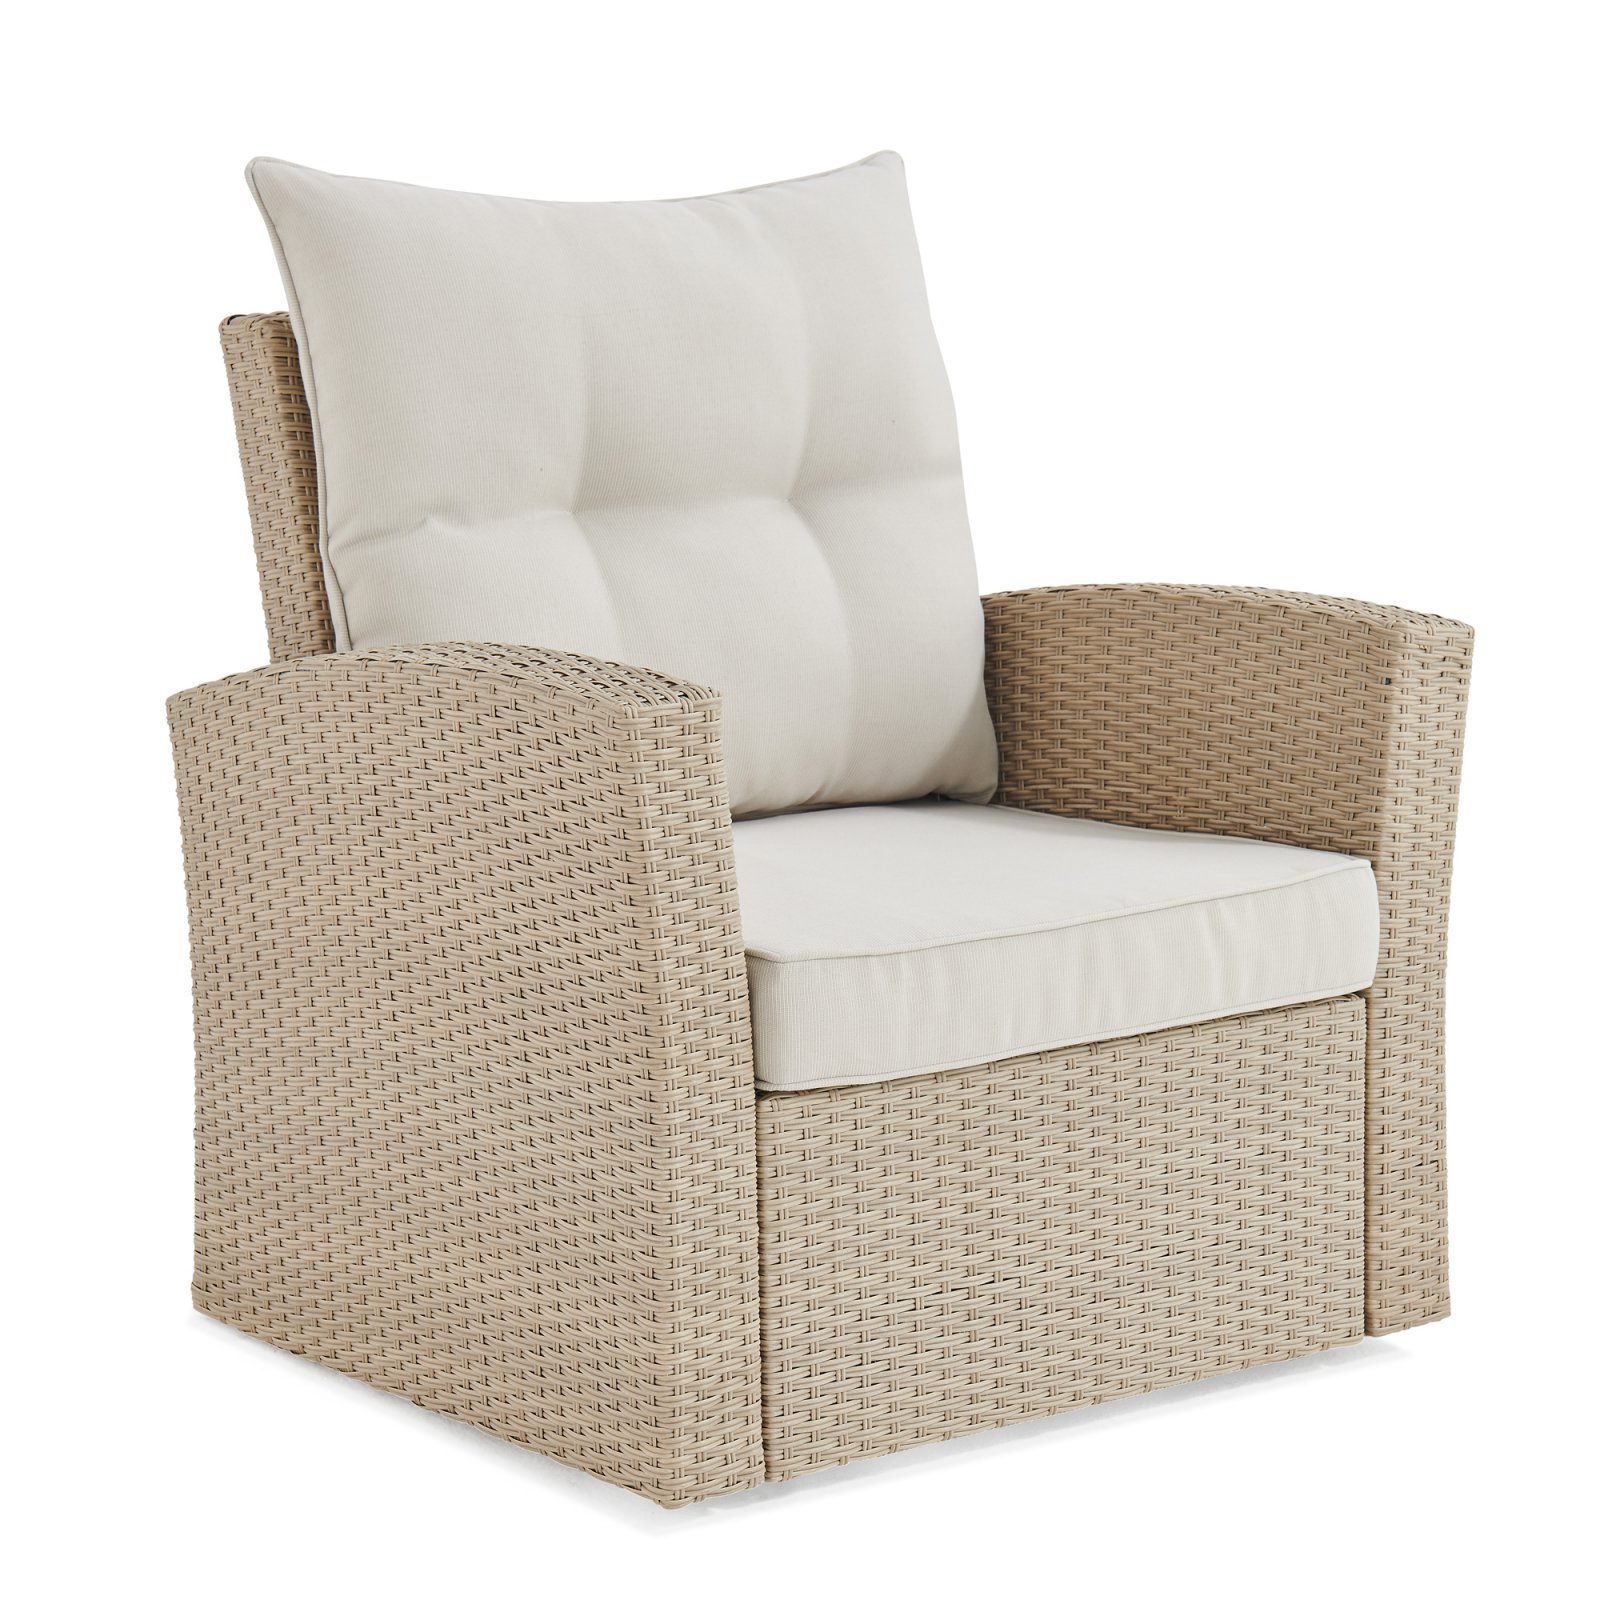 Canaan Cream Wicker Outdoor Seating Set w/ 2 Chairs and 2 Large Ottomans - image 3 of 10